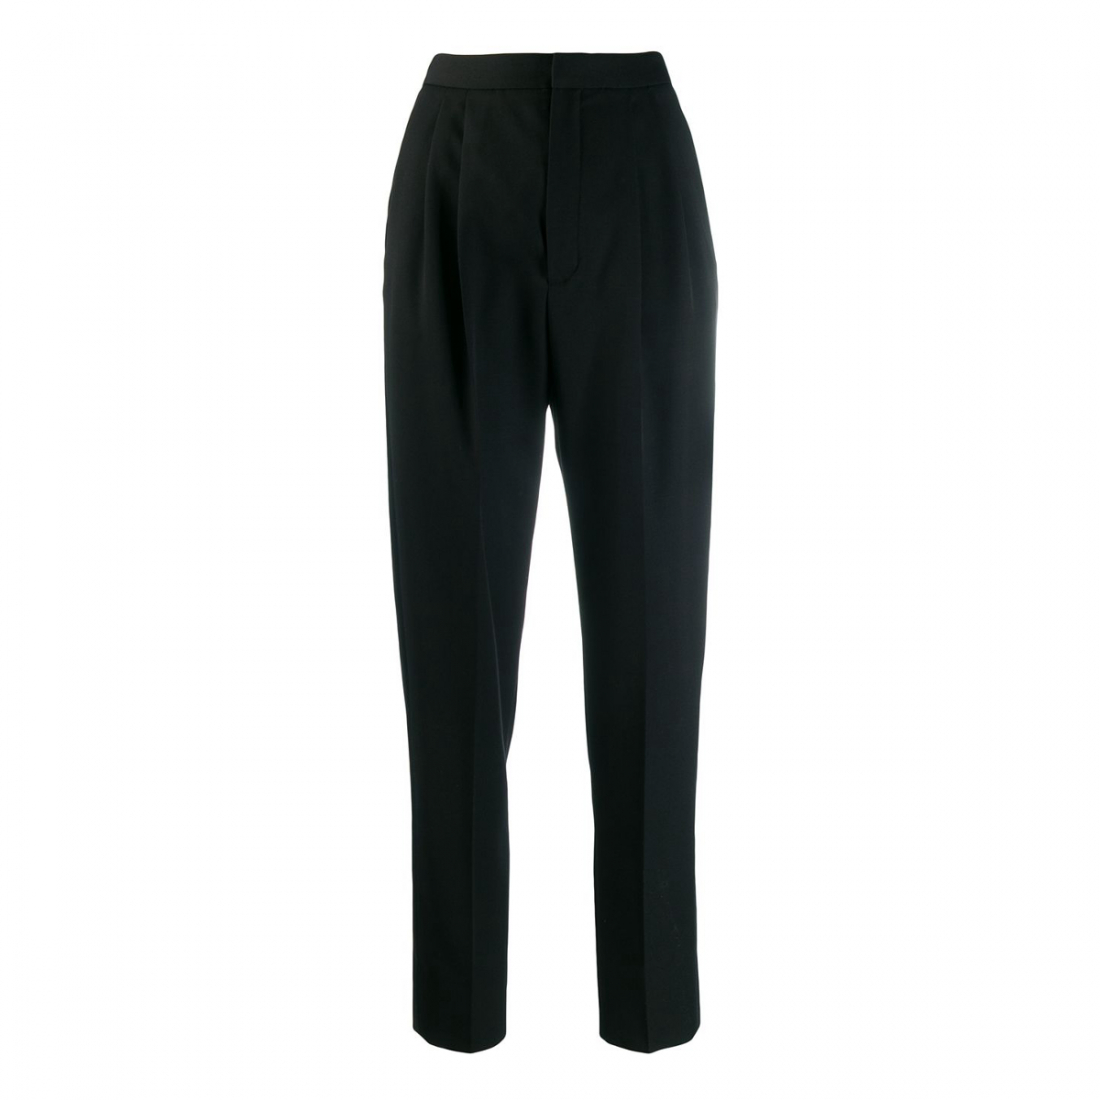 Women's 'Tailored' Trousers